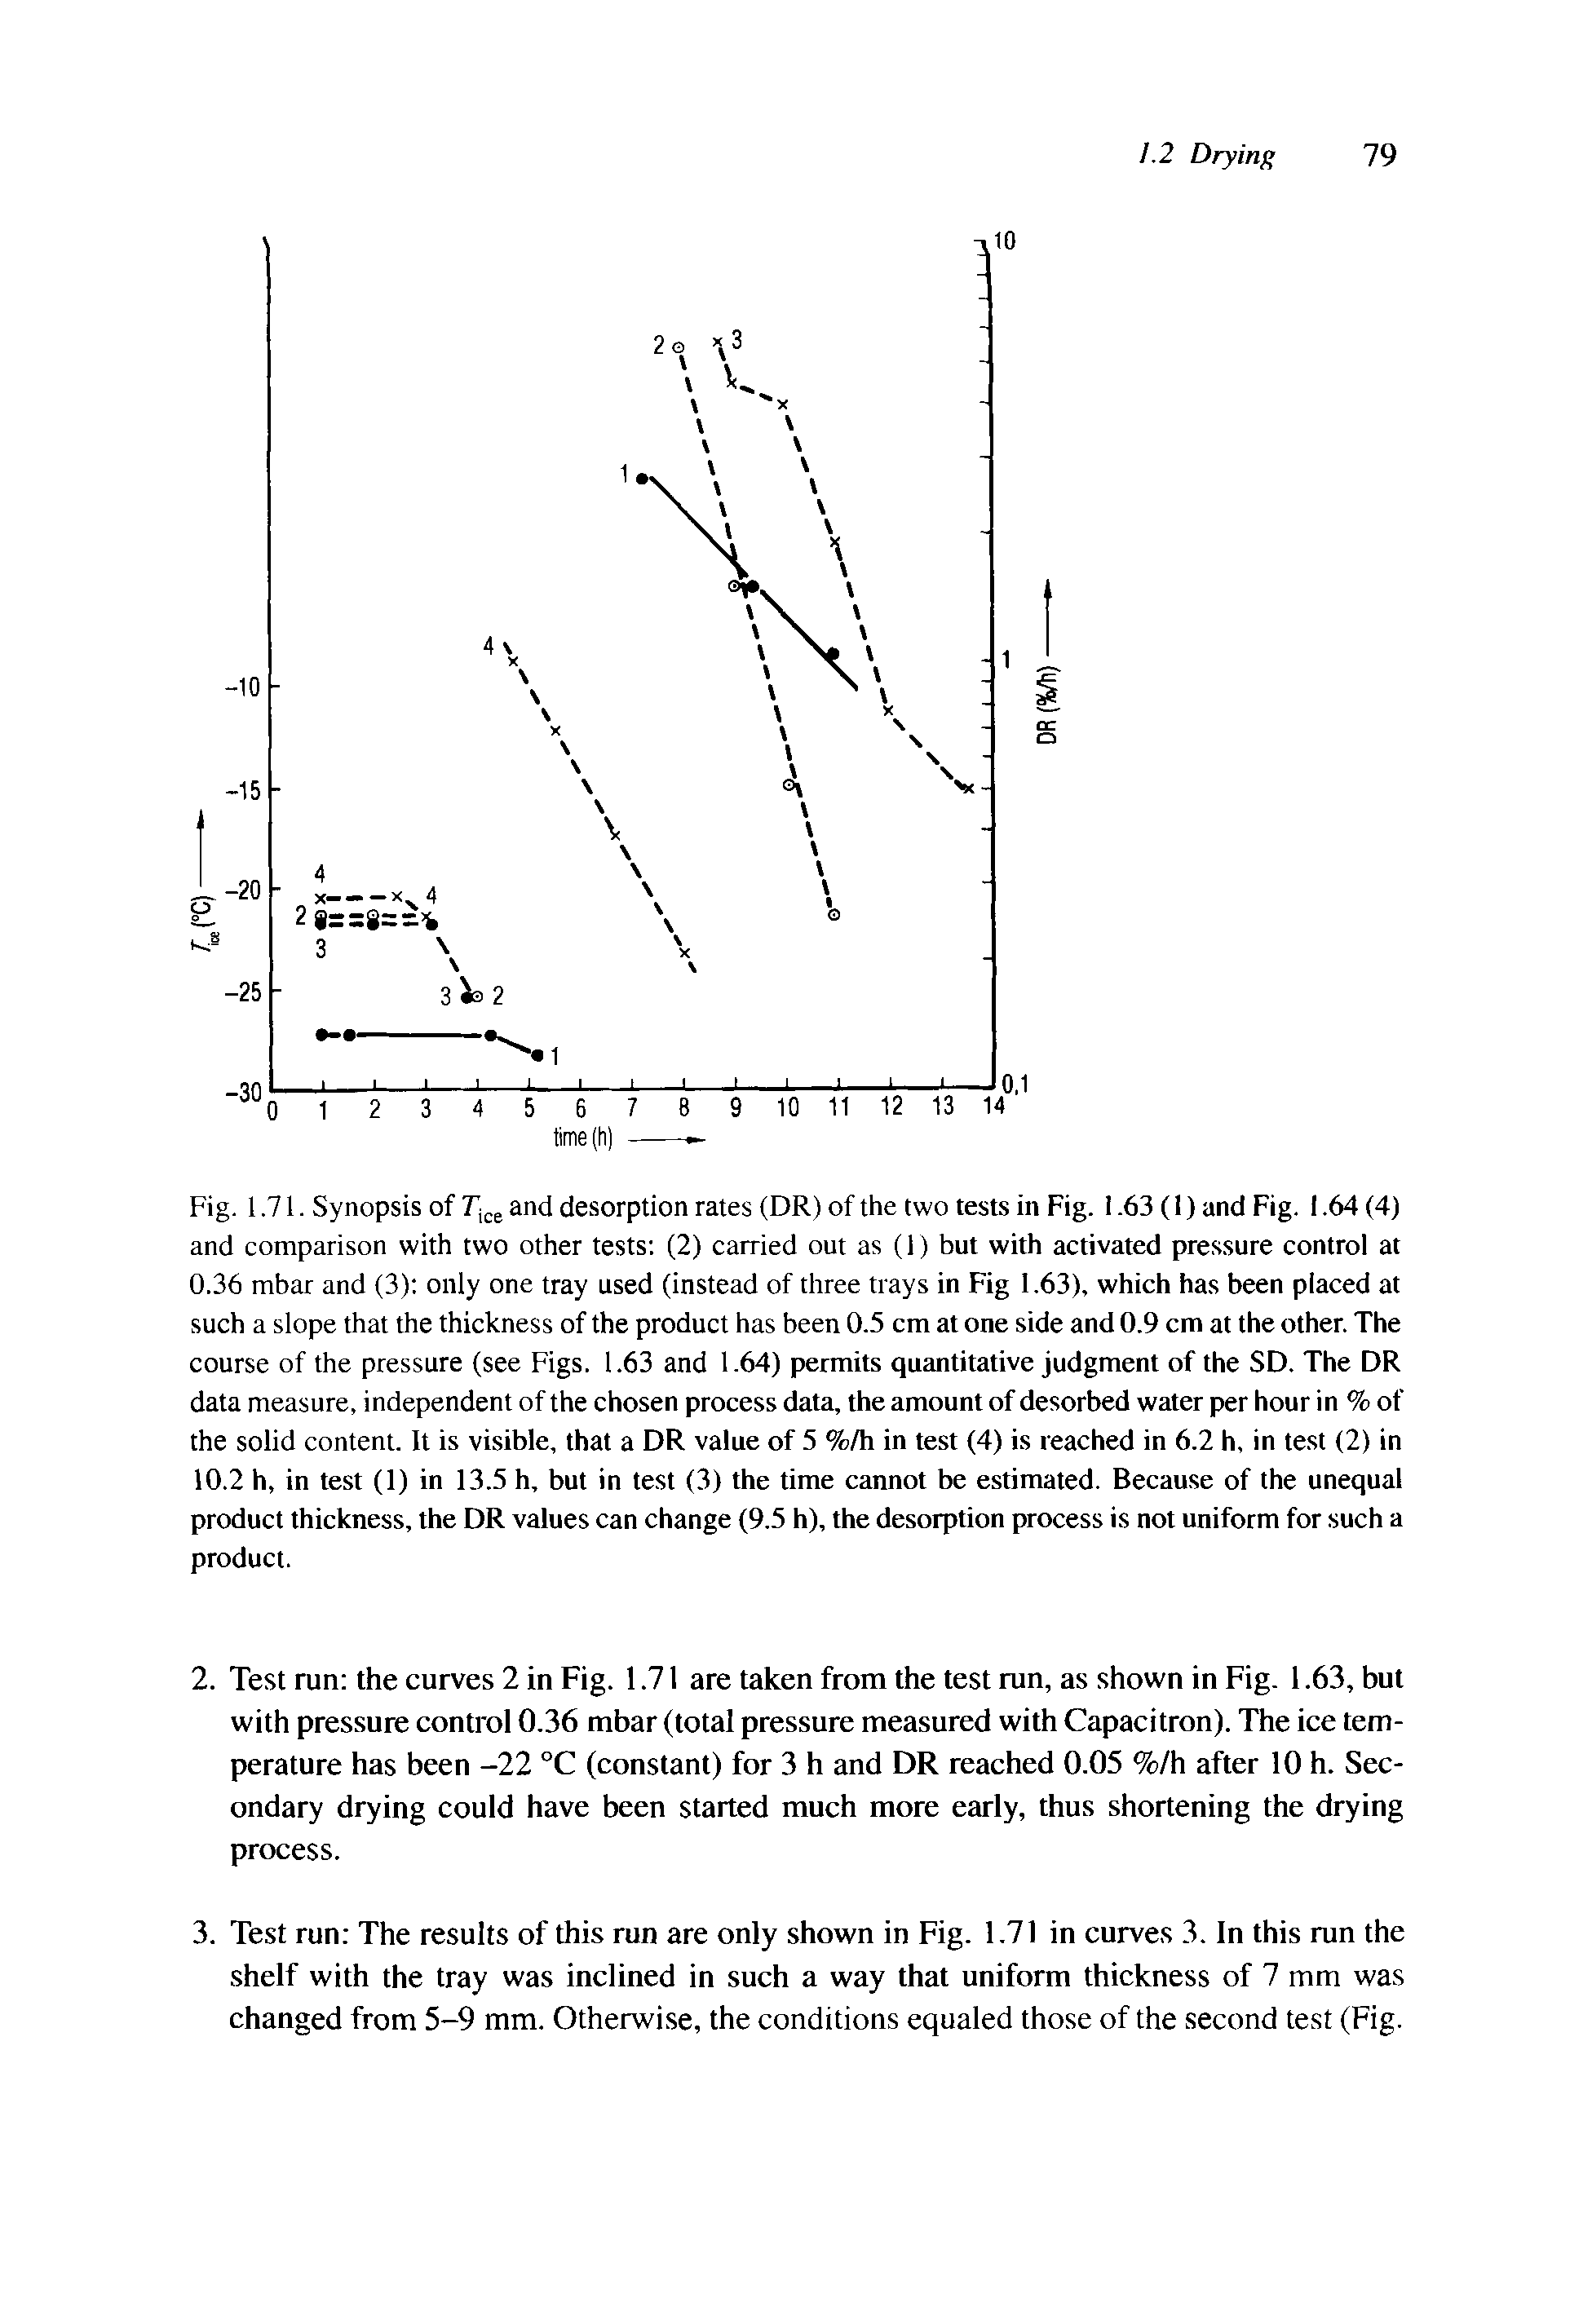 Fig. 1.71. Synopsis of Tict and desorption rates (DR) of the two tests in Fig. 1.63 (1) and Fig. 1.64 (4) and comparison with two other tests (2) carried out as (1) but with activated pressure control at 0.36 mbar and (3) only one tray used (instead of three trays in Fig 1.63), which has been placed at such a slope that the thickness of the product has been 0.5 cm at one side and 0.9 cm at the other. The course of the pressure (see Figs. 1.63 and 1.64) permits quantitative judgment of the SD. The DR data measure, independent of the chosen process data, the amount of desorbed water per hour in % of the solid content. It is visible, that a DR value of 5 %/h in test (4) is reached in 6.2 h, in test (2) in 10.2 h, in test (1) in 13.5 h, but in test (3) the time cannot be estimated. Because of the unequal product thickness, the DR values can change (9.5 h), the desorption process is not uniform for such a product.